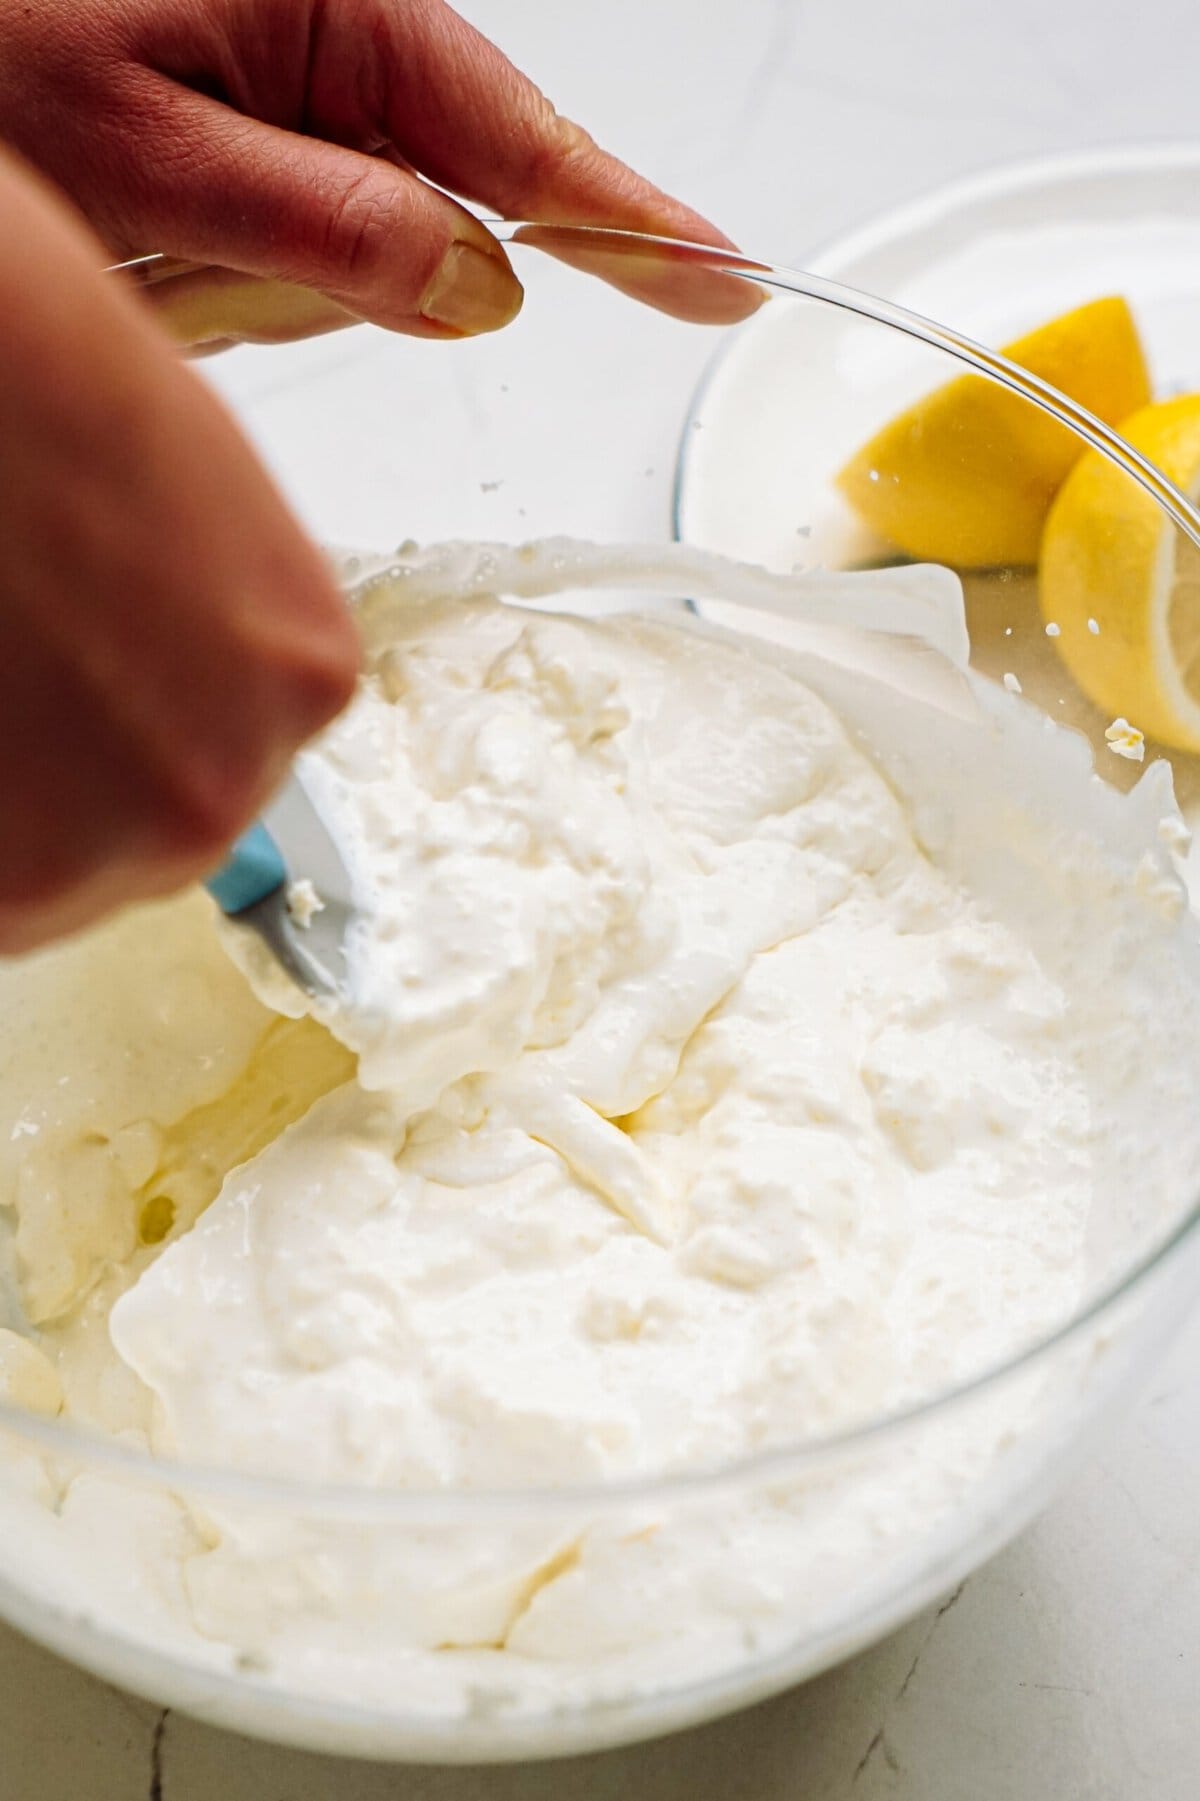 A person stiring white cream from a glass bowl with sliced lemons in the background.